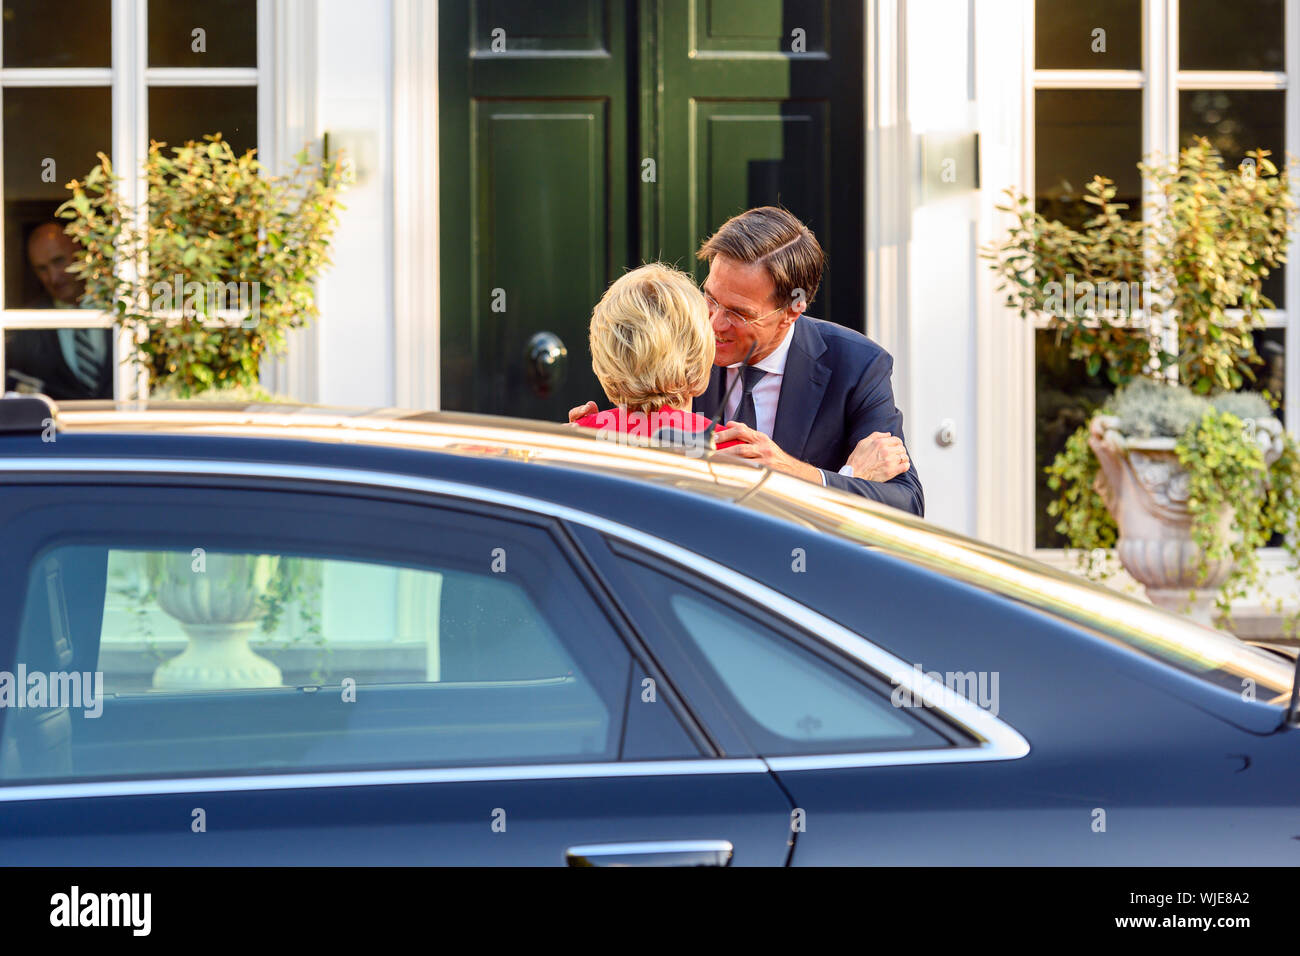 The Hague, Netherlands, September 3rd, 2019 (L to R: Ursula Von der Leyen and Mark Rutte). Prime Minister Mark Rutte receives future president of the European Commission Ursula Von der Leyen. The Prime Minister and the upcoming Commission President will discuss the agenda for the new European Commission. Stock Photo